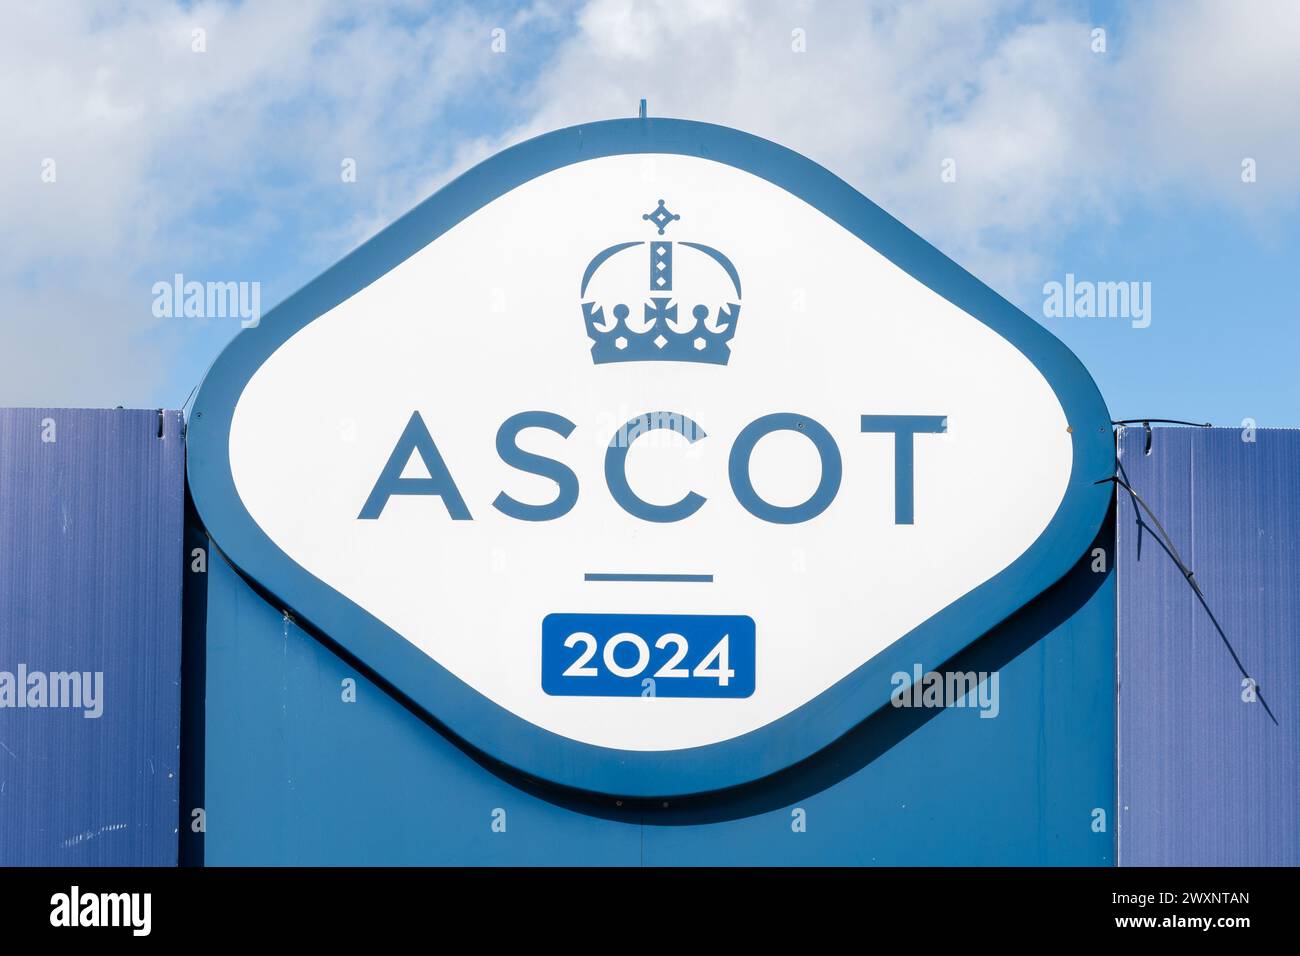 Ascot 2024 sign with the royal crown logo at the racecourse, Ascot, Berkshire, England, UK Stock Photo